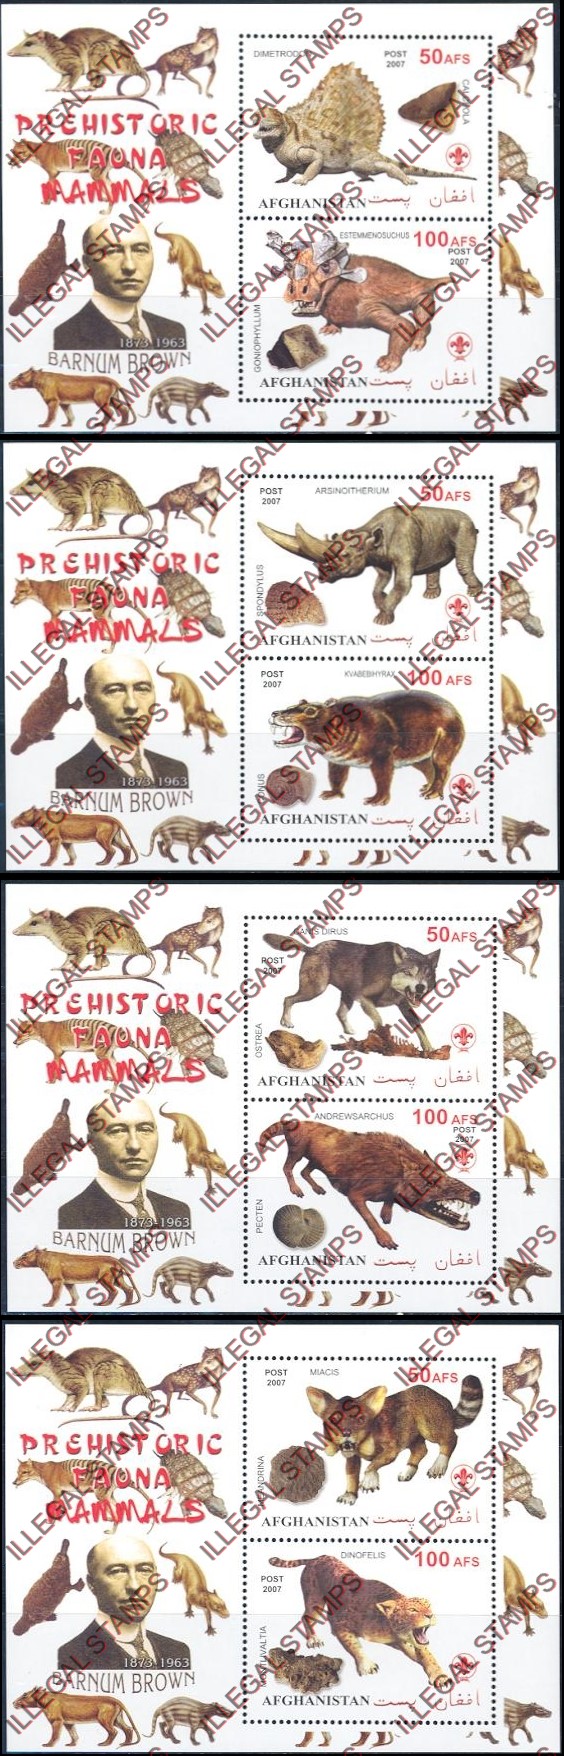 Afghanistan 2007 Fauna Prehistoric Animals Barnum Brown Illegal Stamp Souvenir Sheets of Two